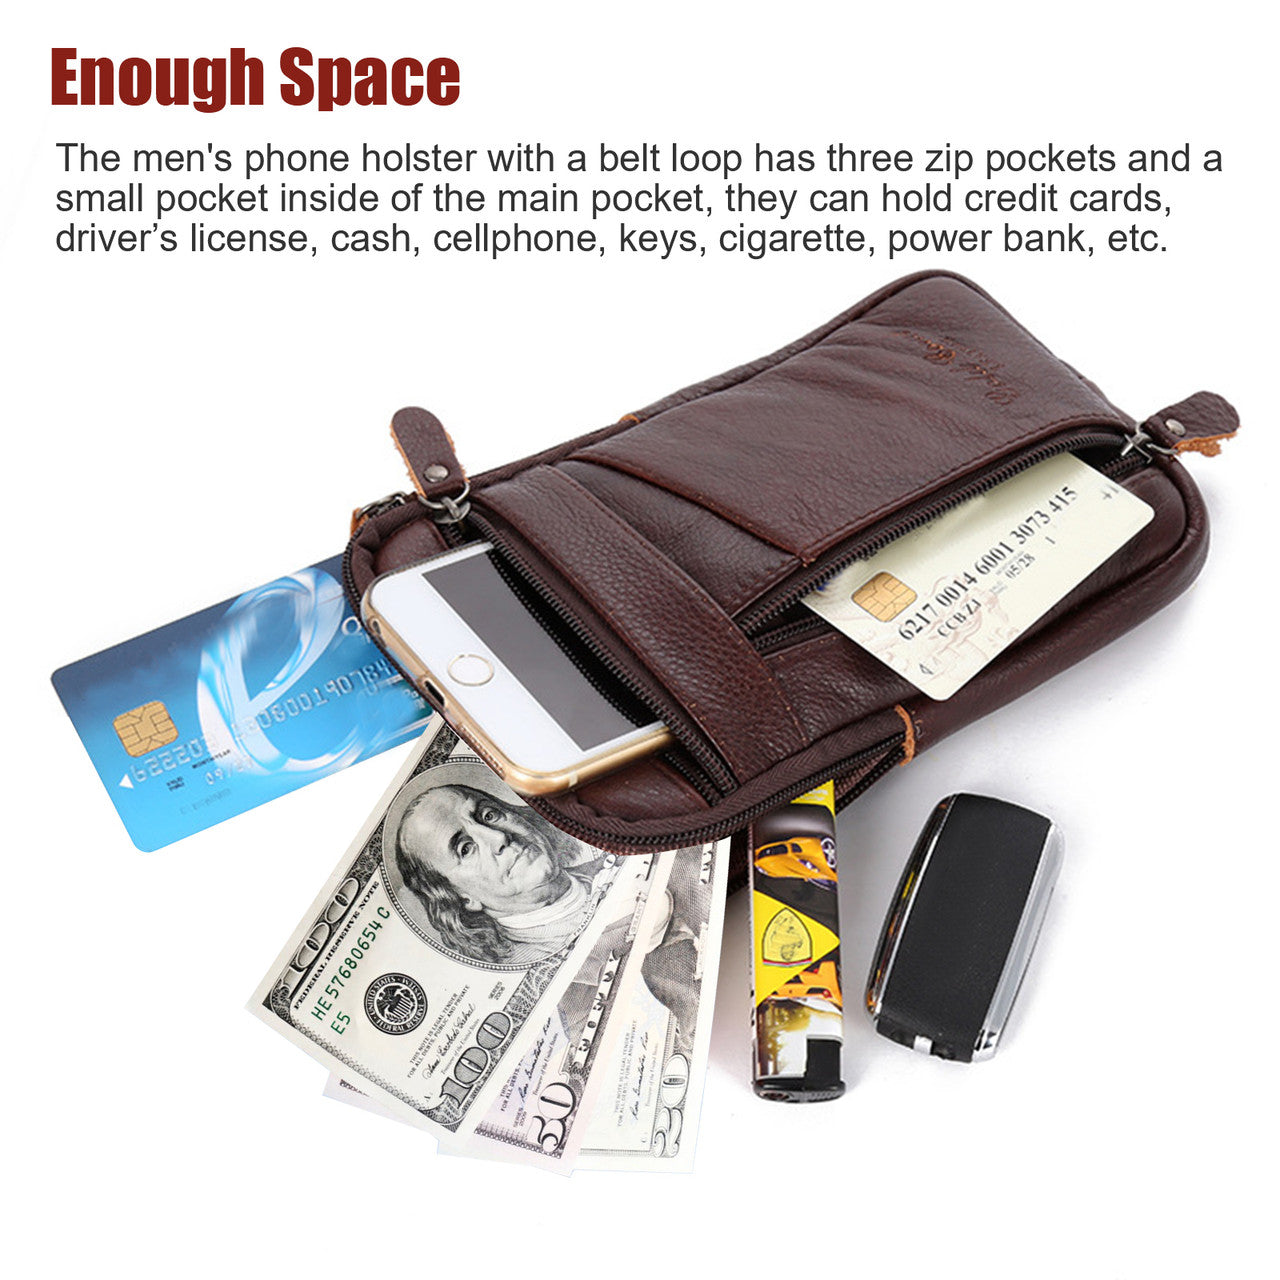 Men Leather Fashion Crossbody Pouch Belt Bag for Travel and Everyday Life